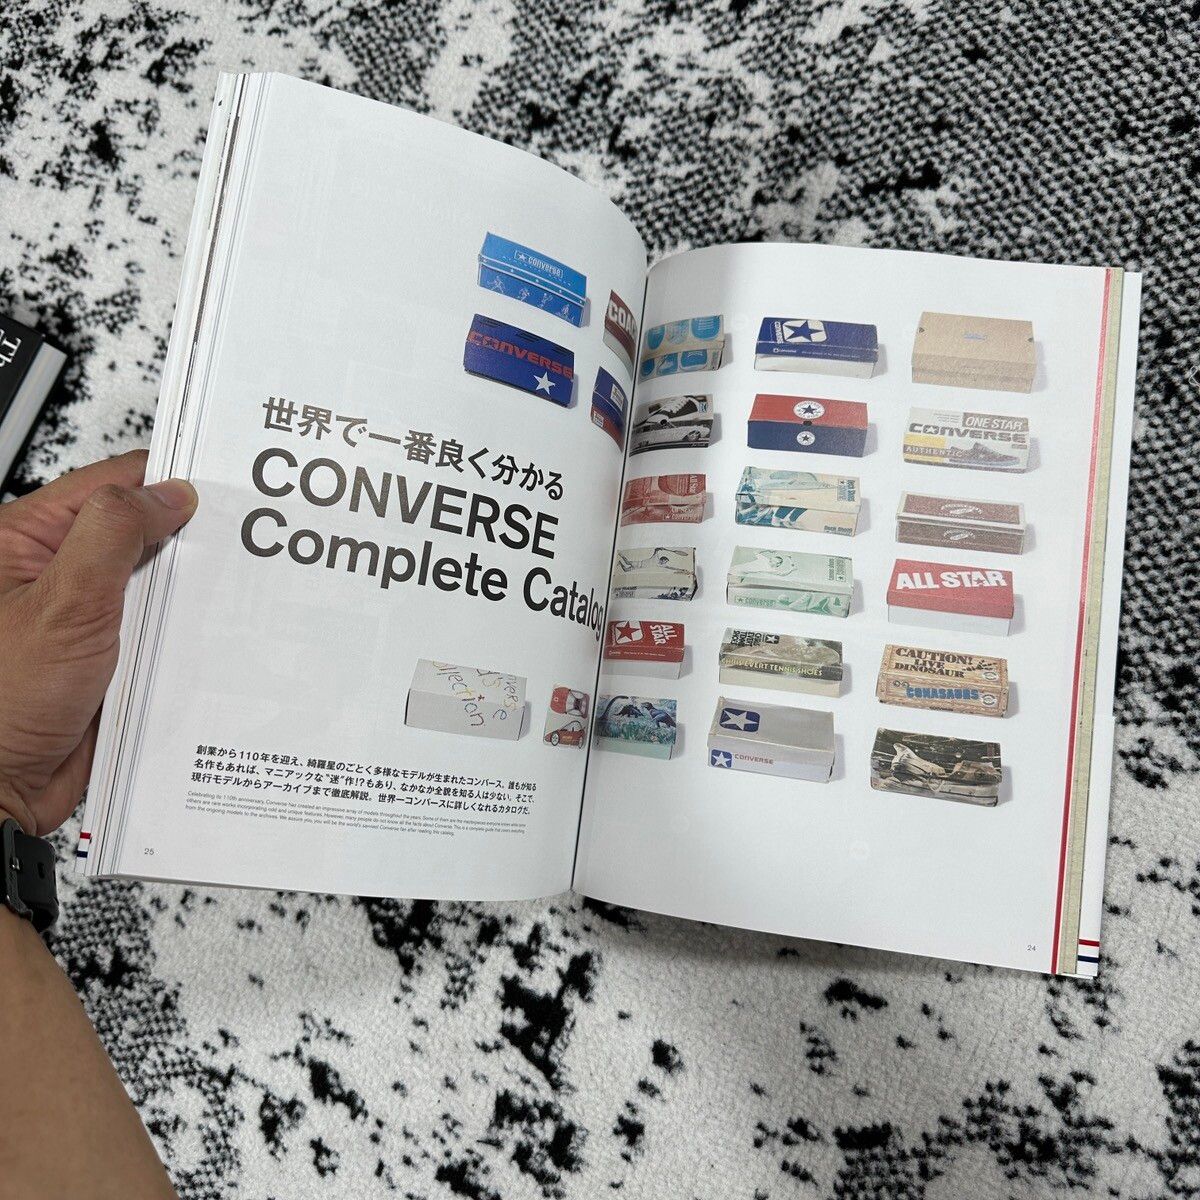 CONVERSE COMPLETE BOOK JAPAN EDITION - 9